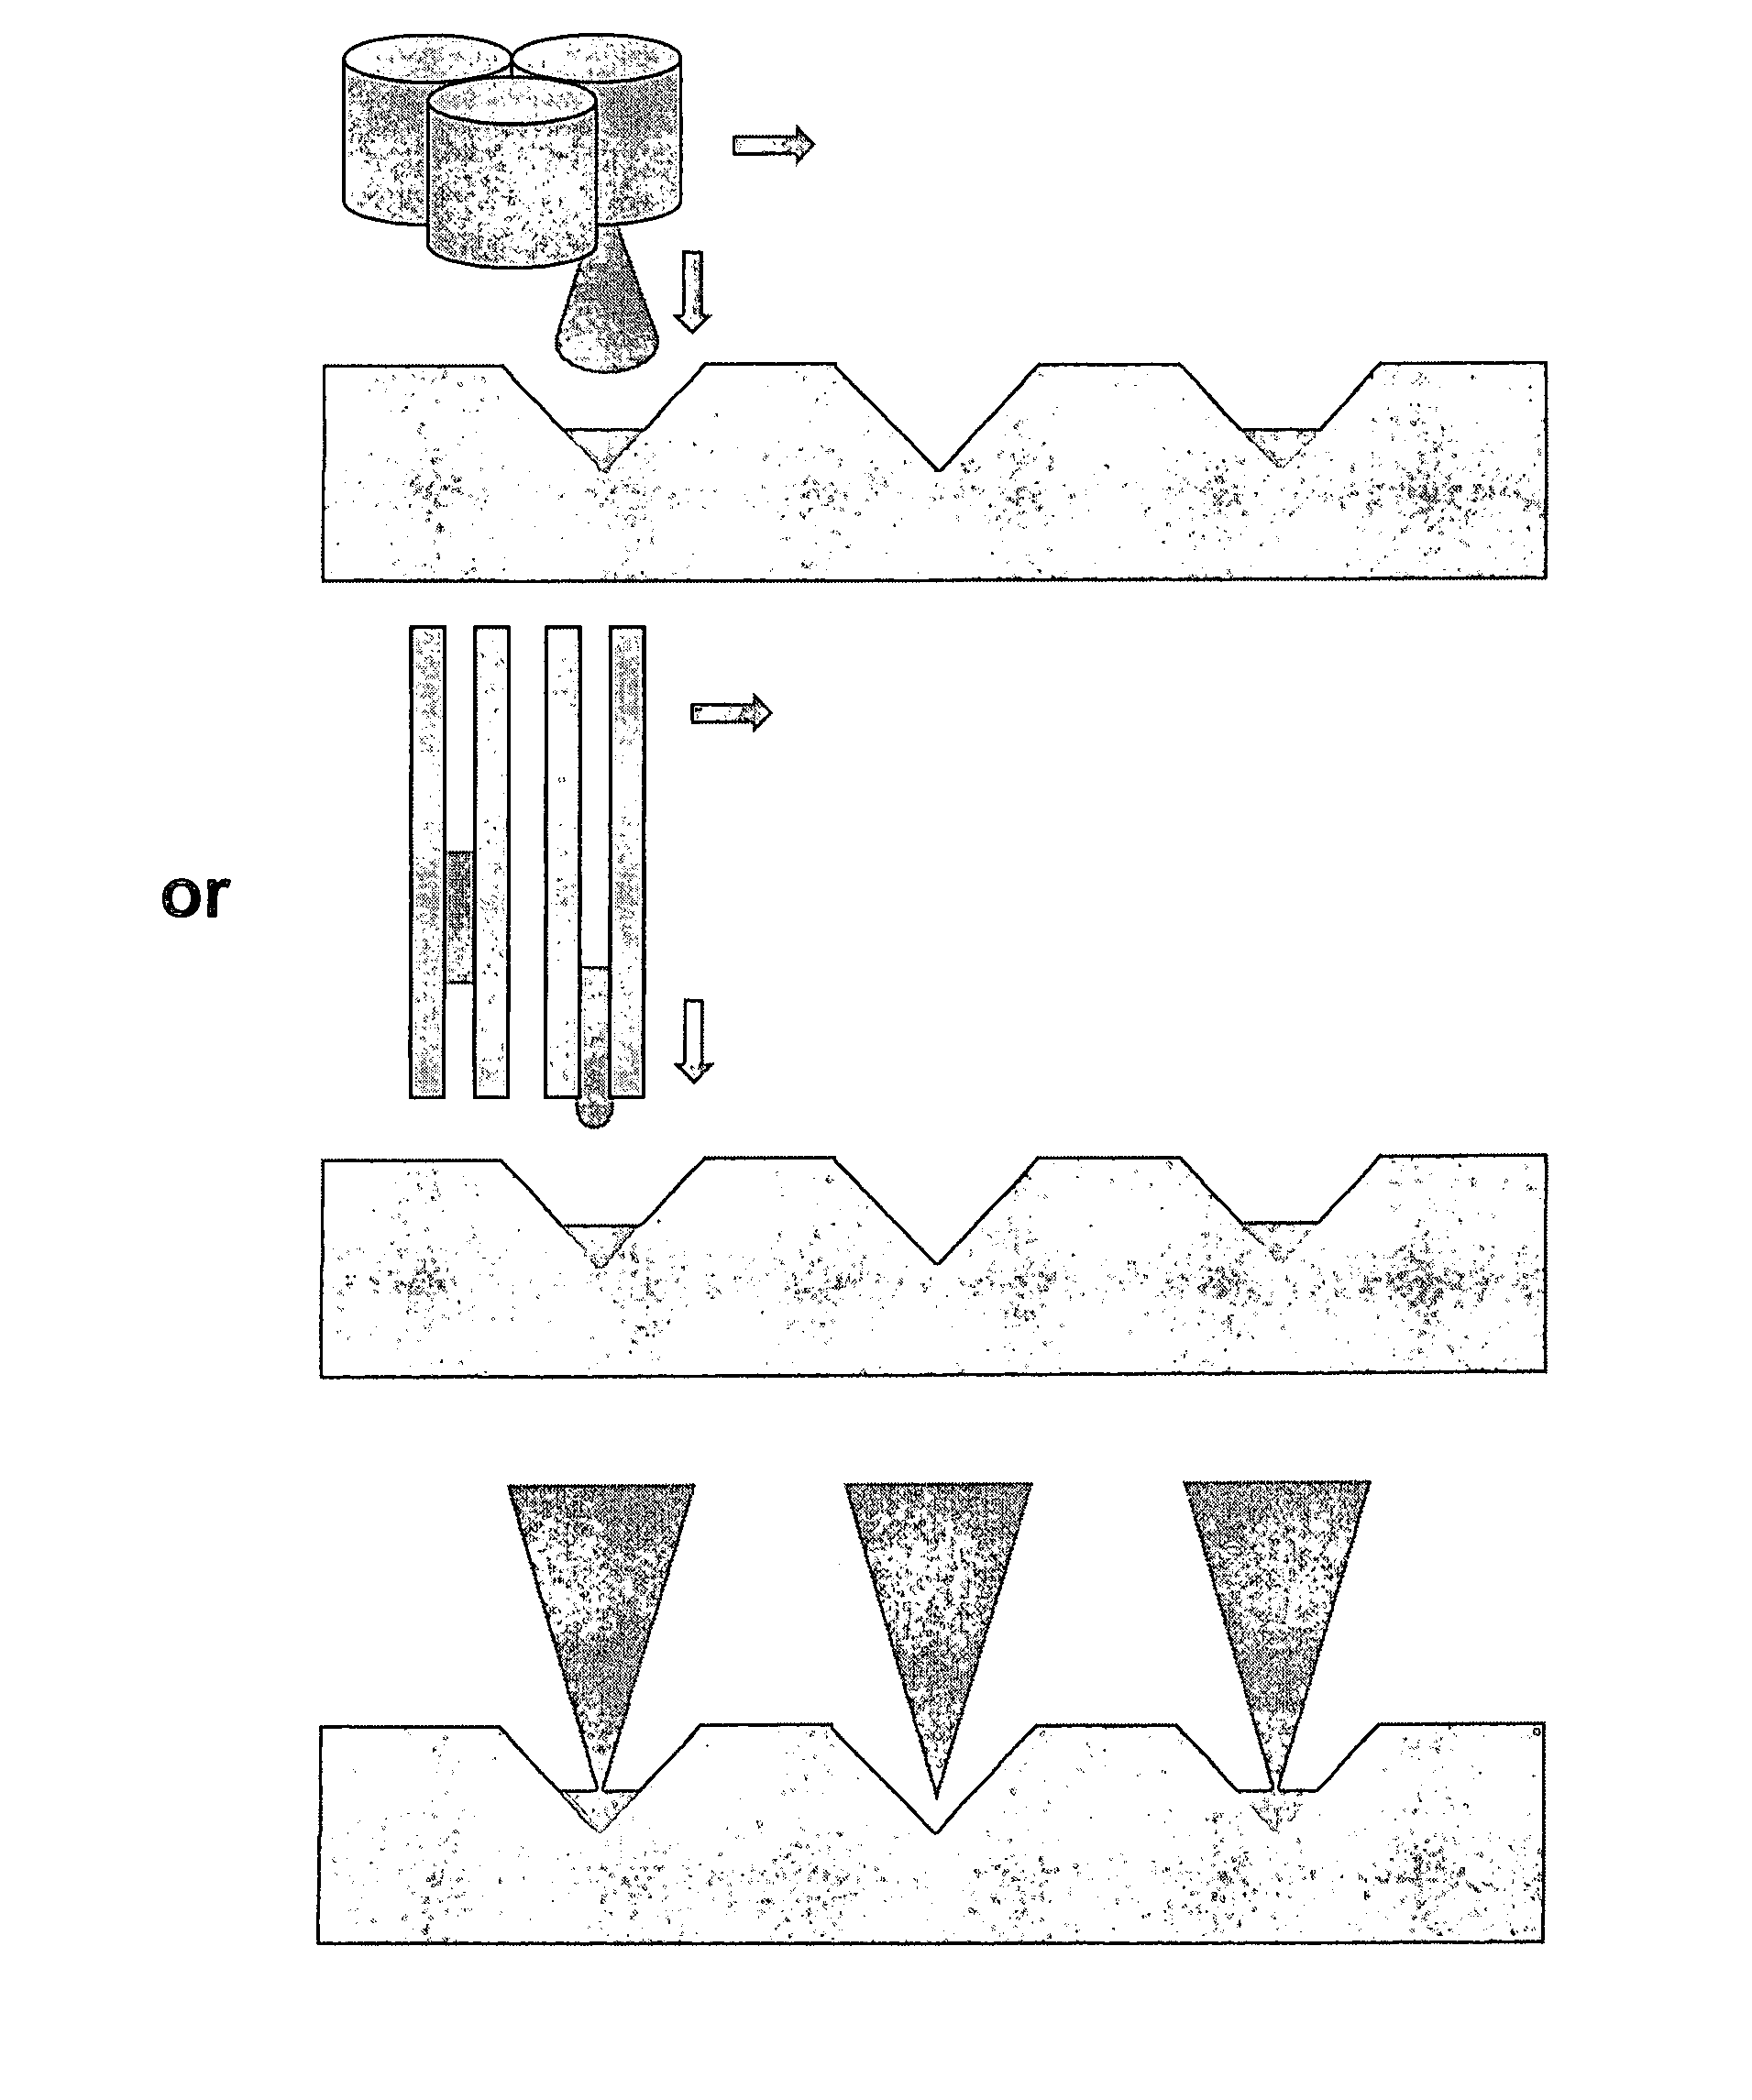 Methods and apparatus for ink delivery to nanolithographic probe systems